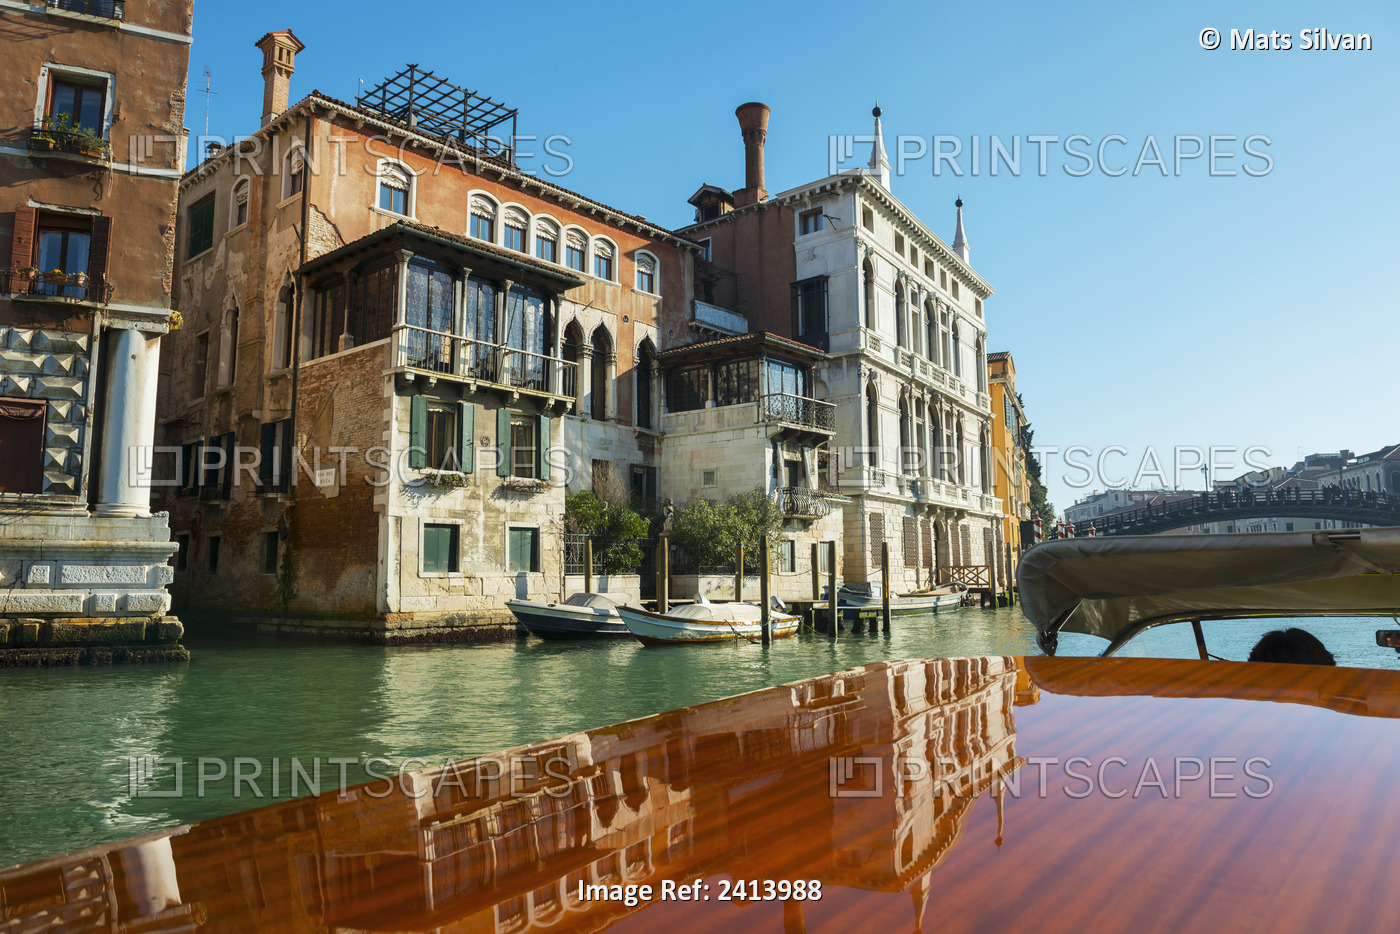 Buildings Along The Shoreline Of The Grand Canal Viewed From A Boat; Venice, ...